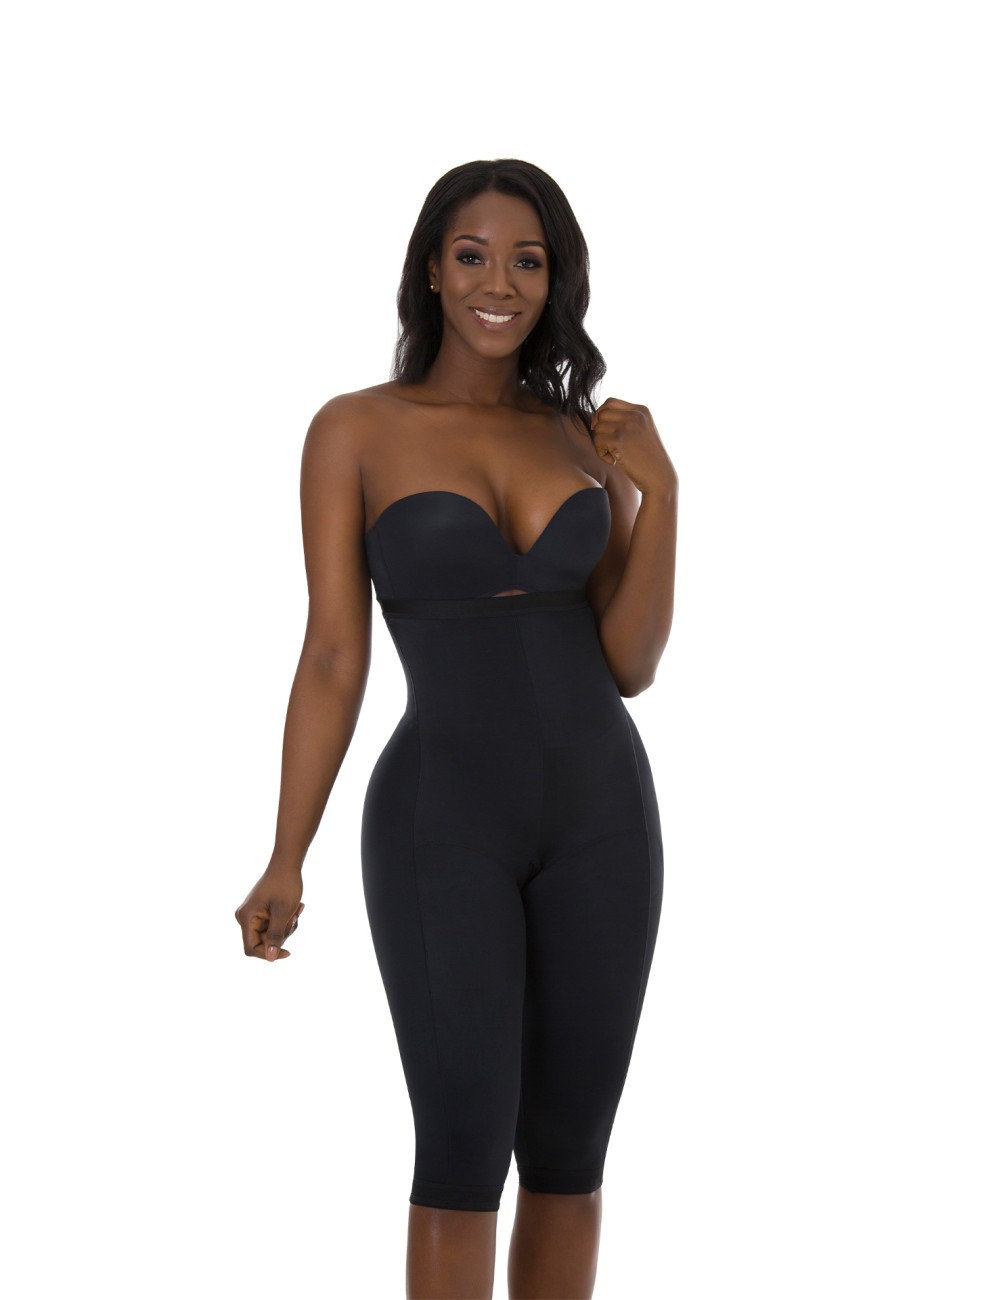 Best Deal for Butt Lifting Shapewear, Capri Workout Pants for